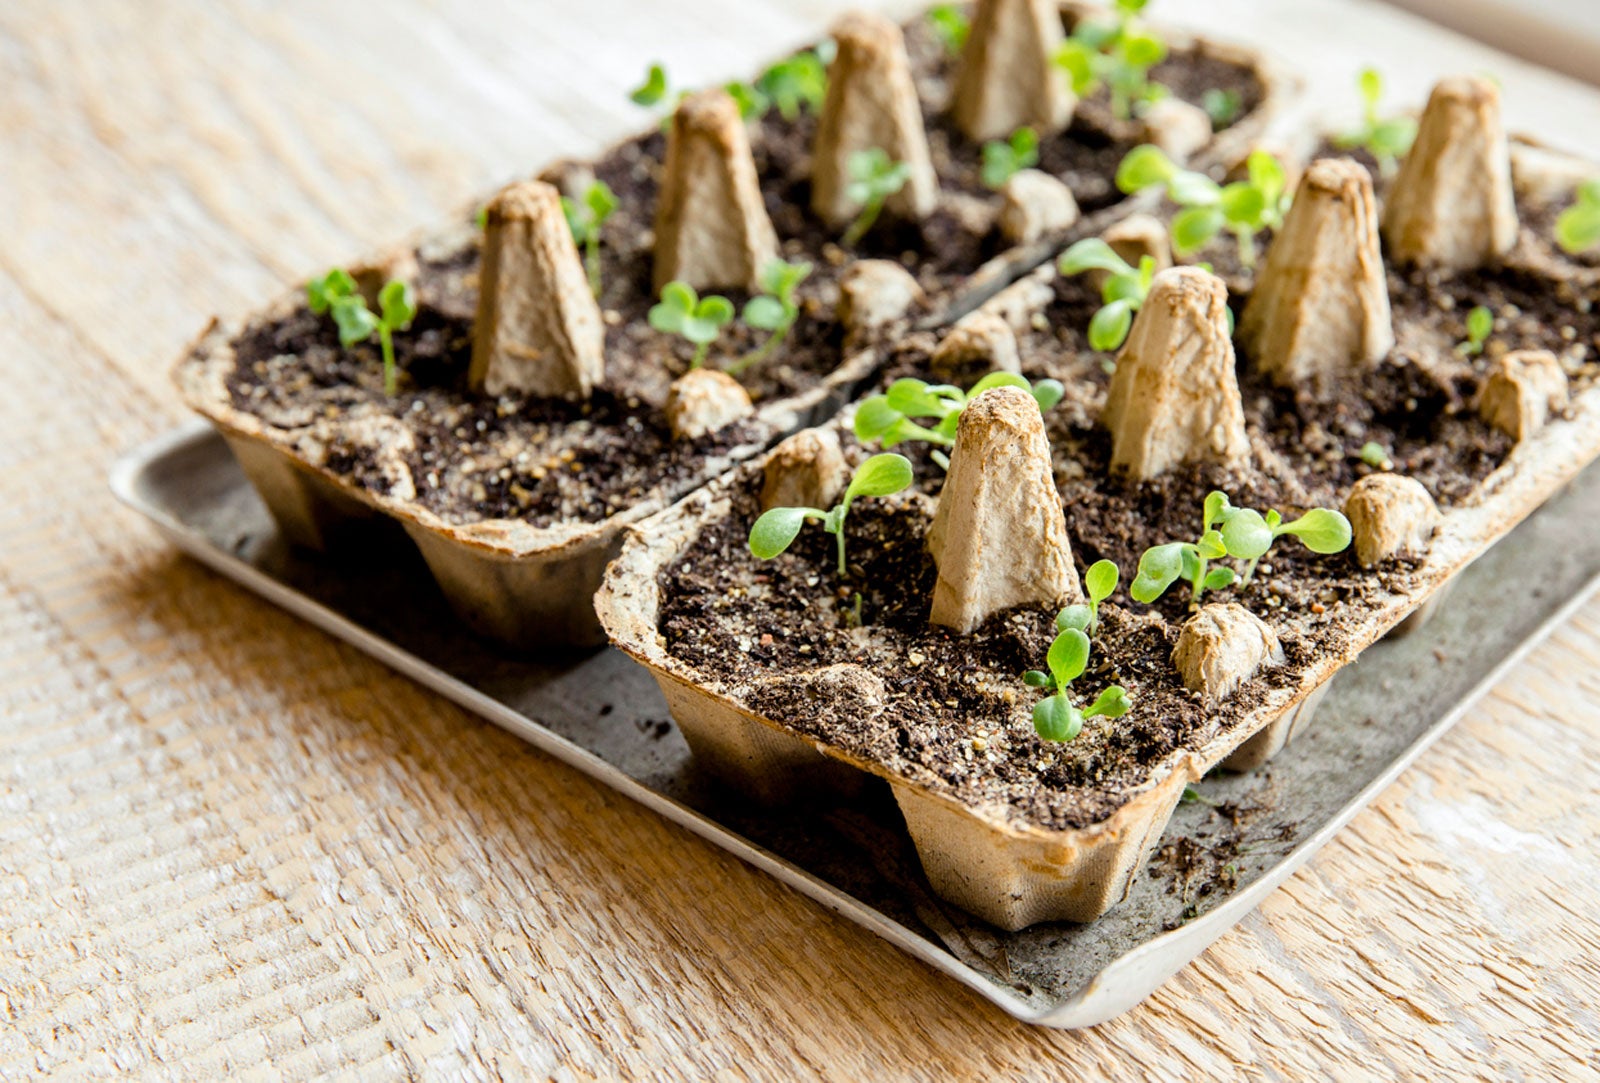 Starting Seeds In An Egg Carton – How To Use Egg Cartons For Seeds